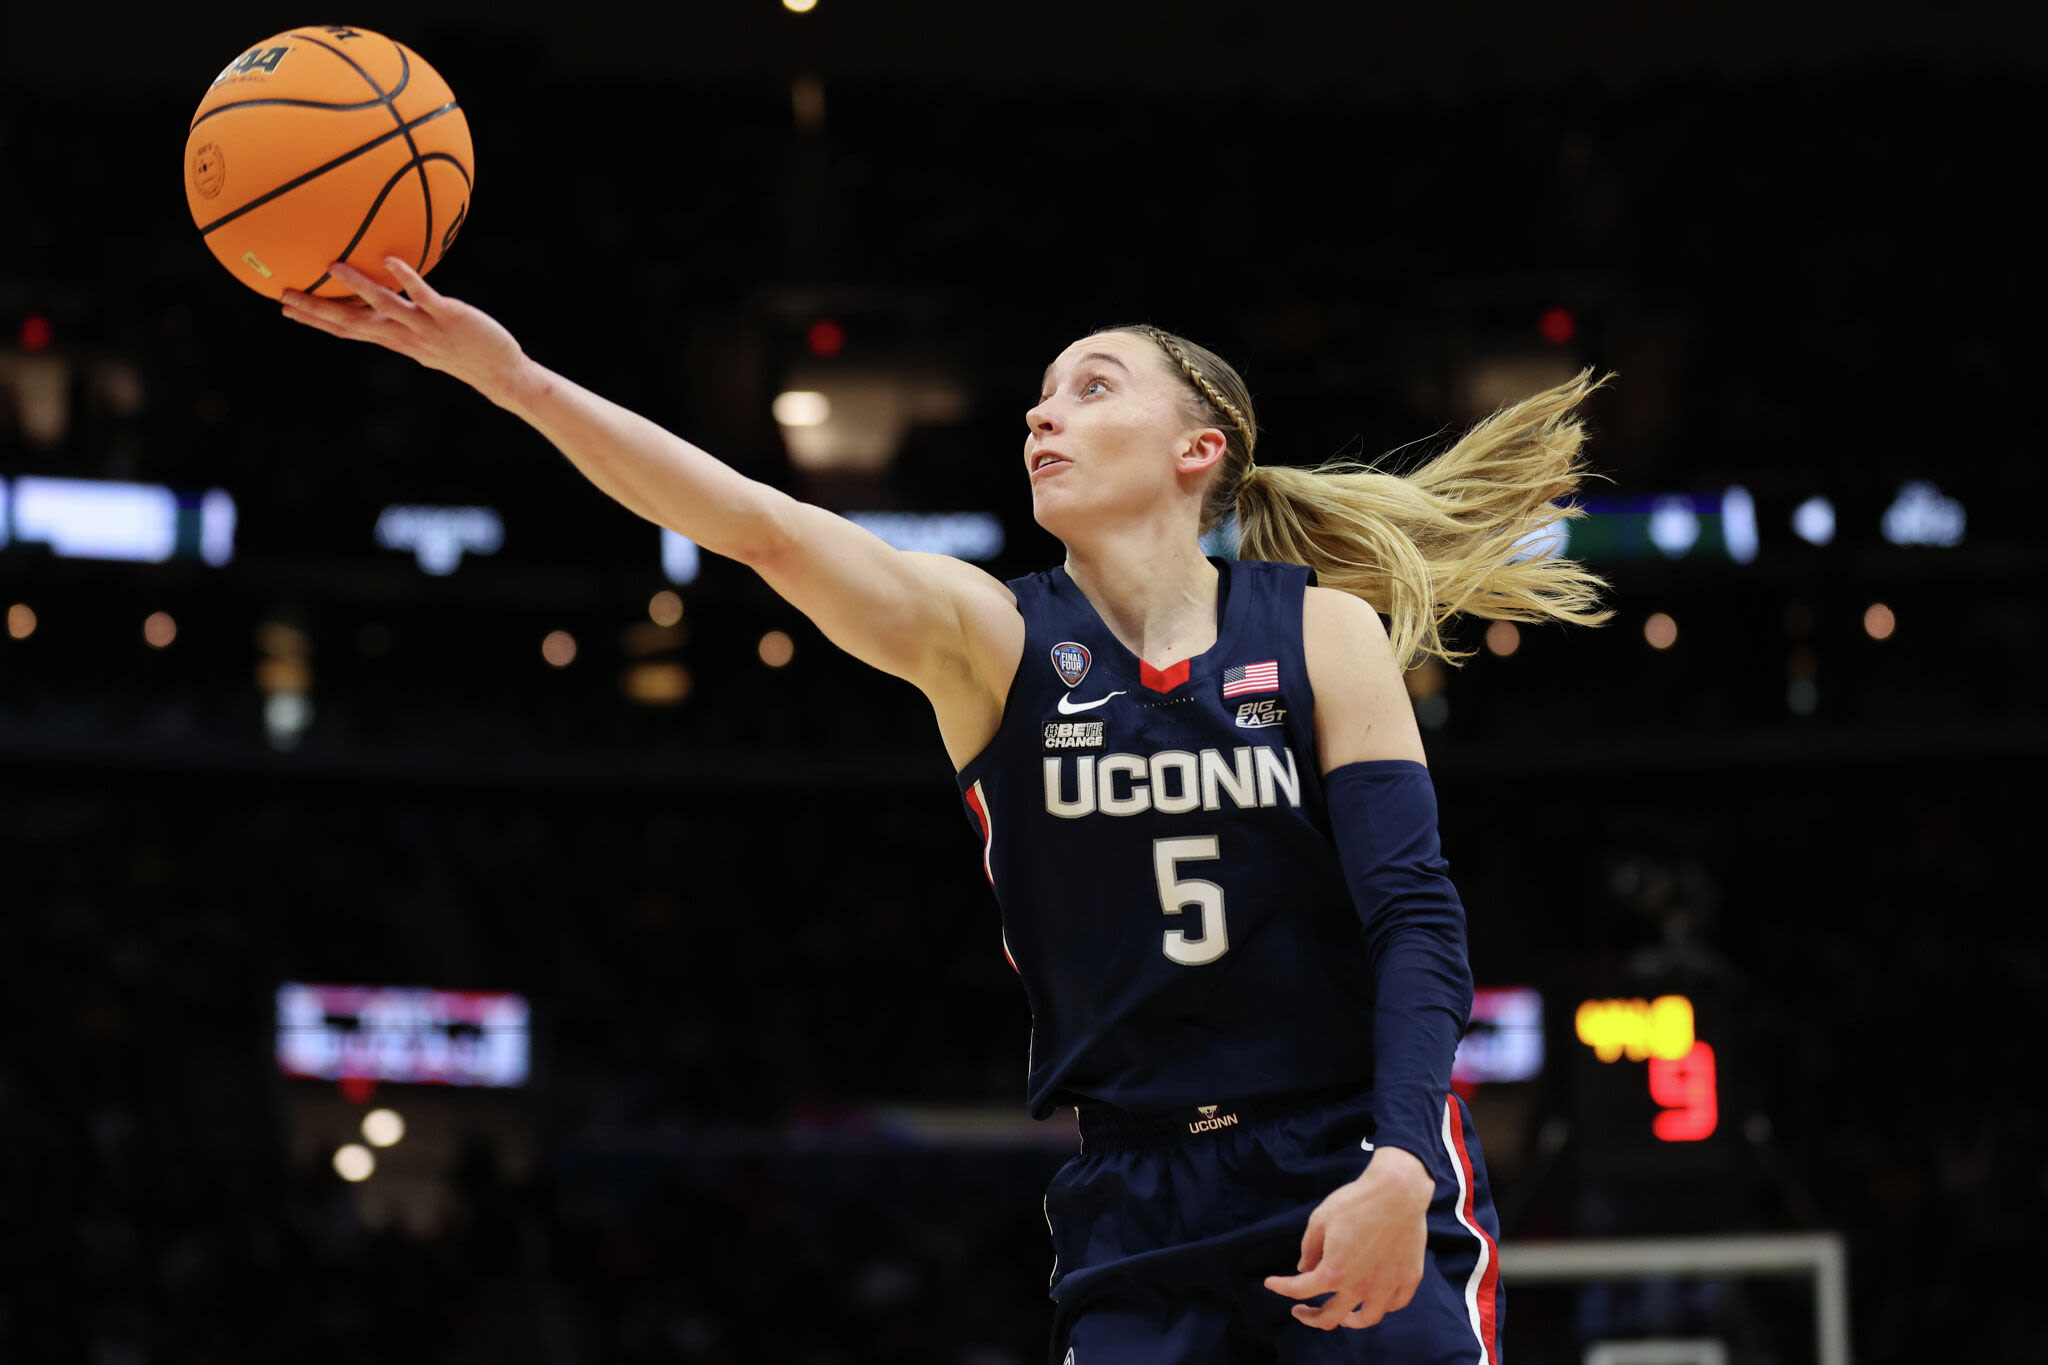 UConn women's basketball star Paige Bueckers named Top Earning Female Athlete by The NIL Store